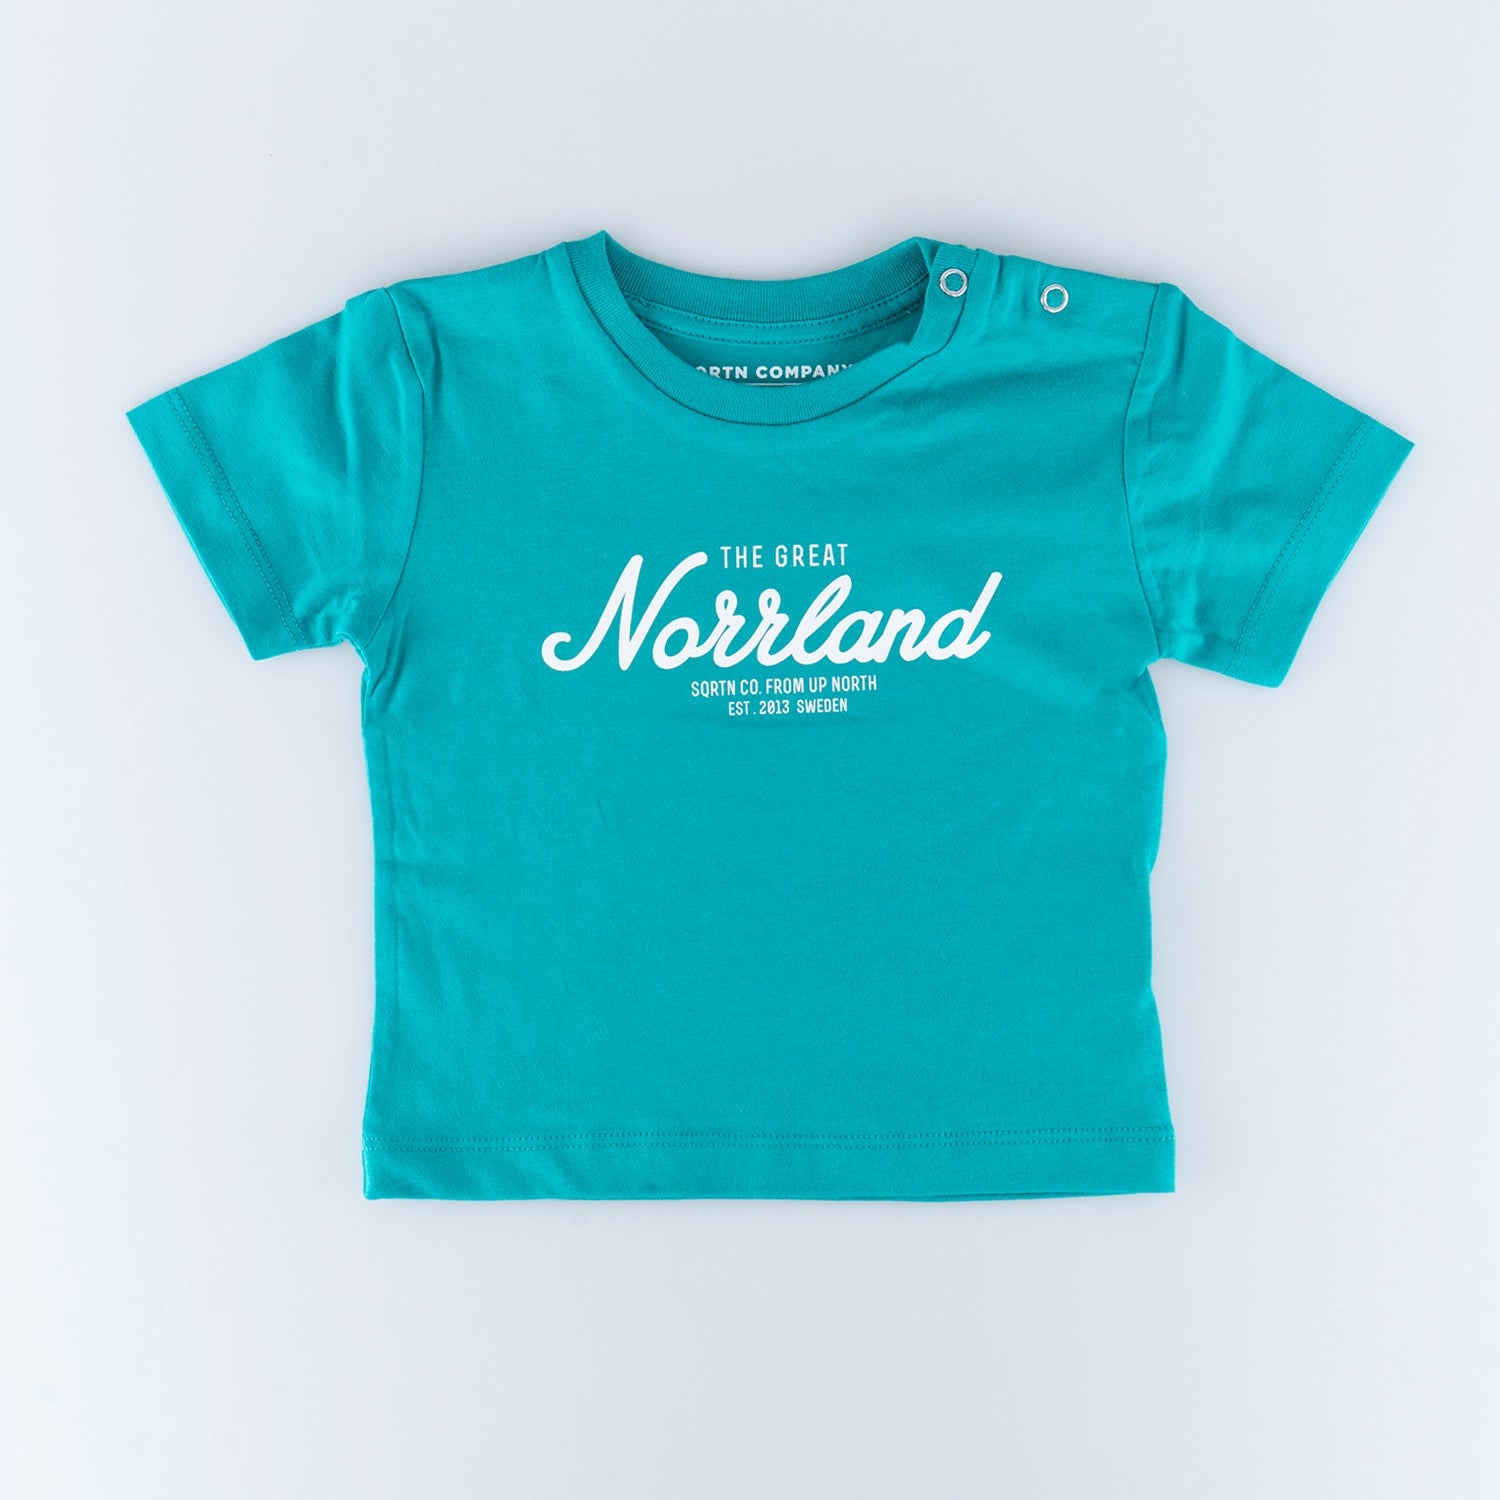 GREAT NORRLAND KIDS T-SHIRT - TROPICAL BLUE